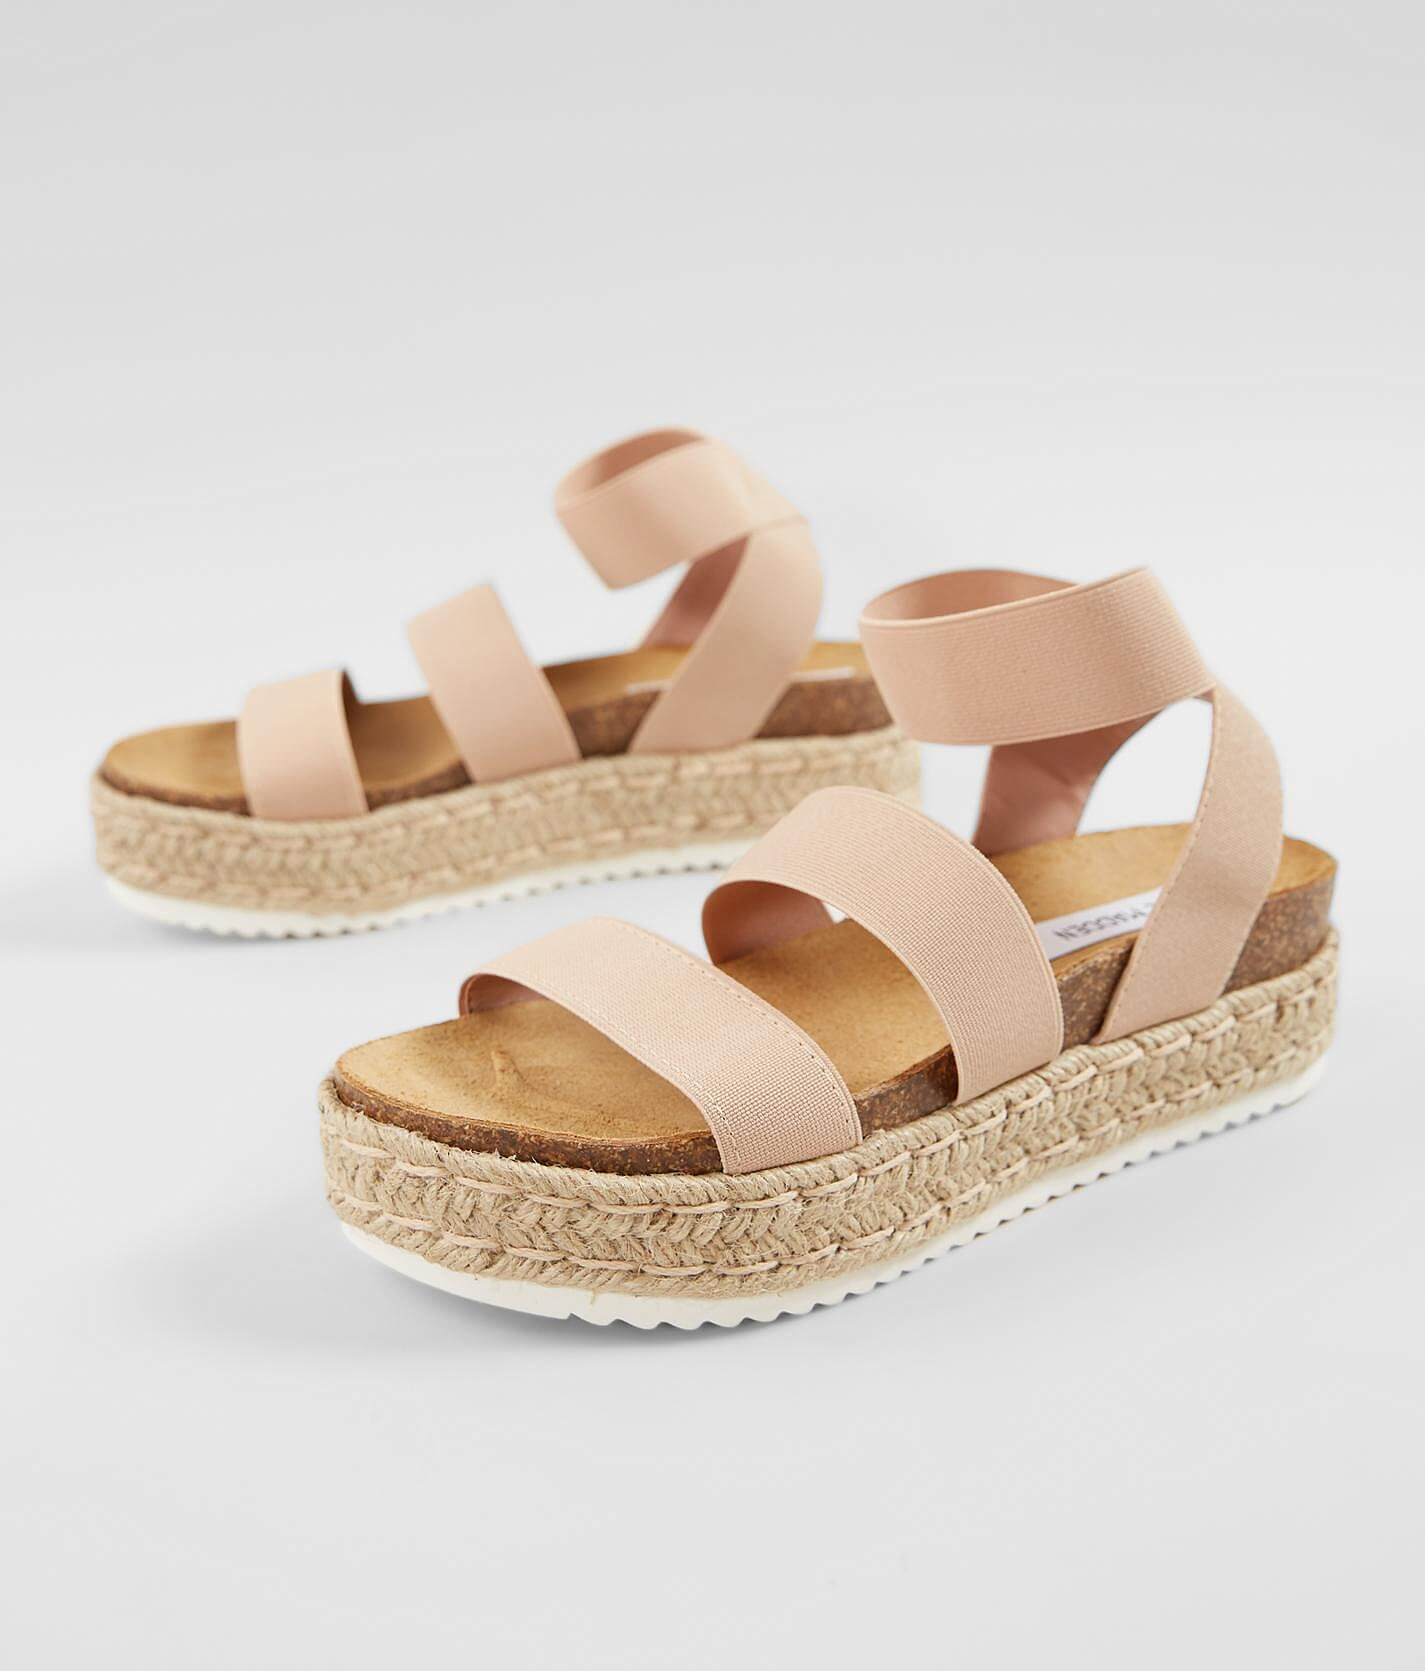 steve madden kimmie sandals review